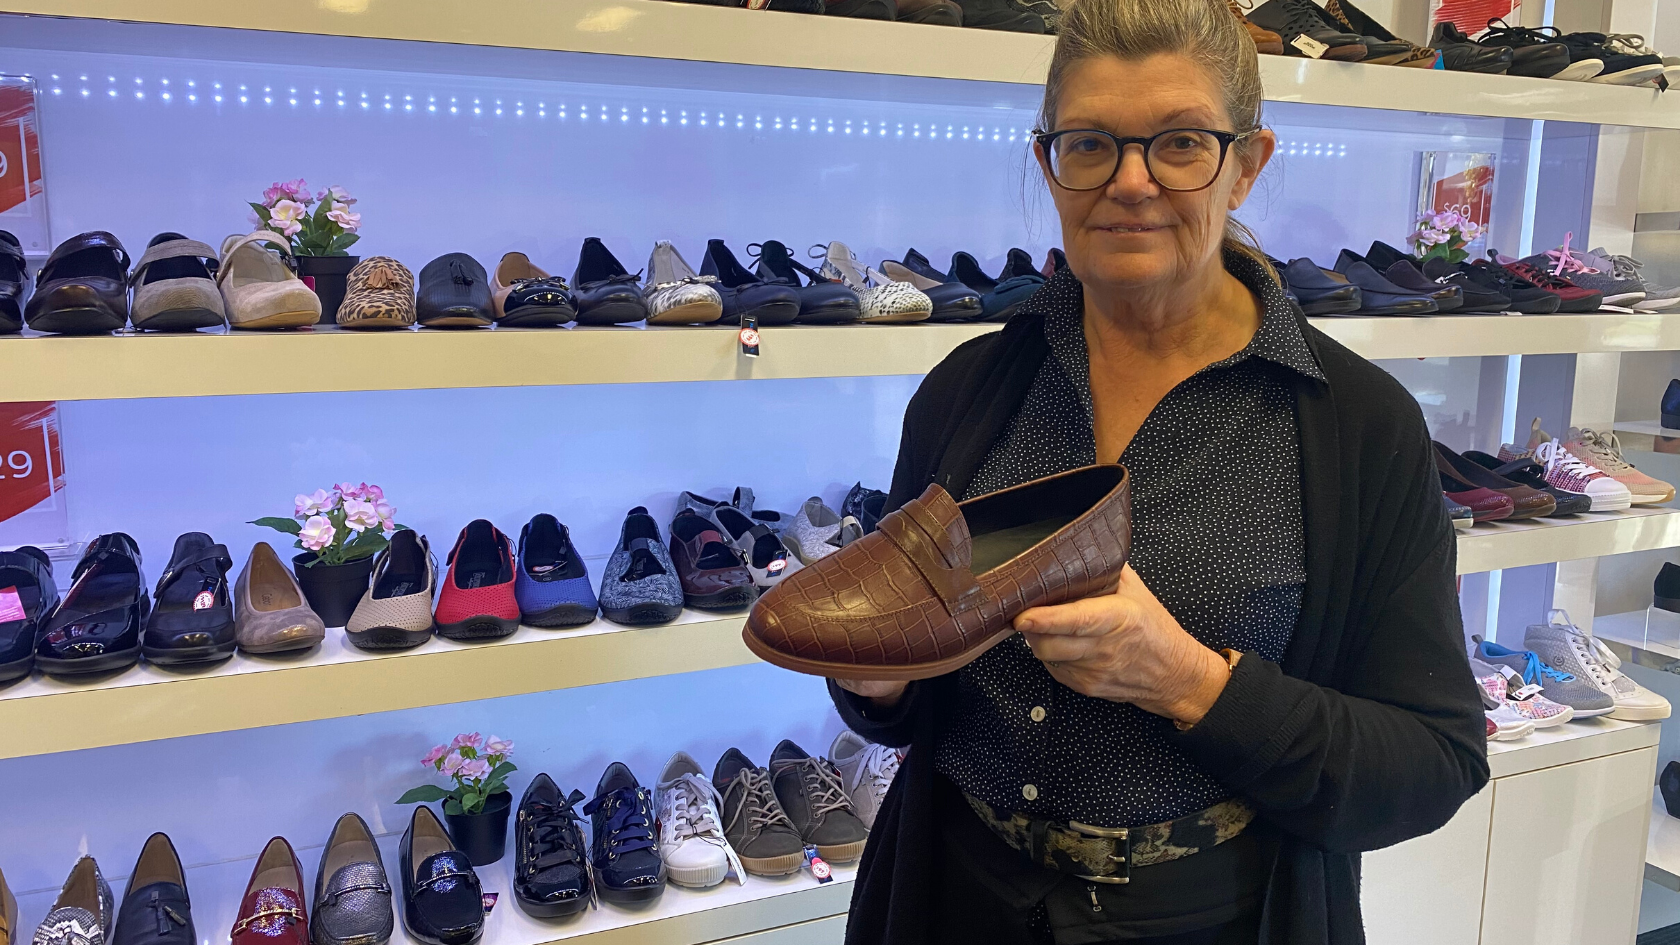 An older woman holding a brown leather loafer in front of a shoe display.